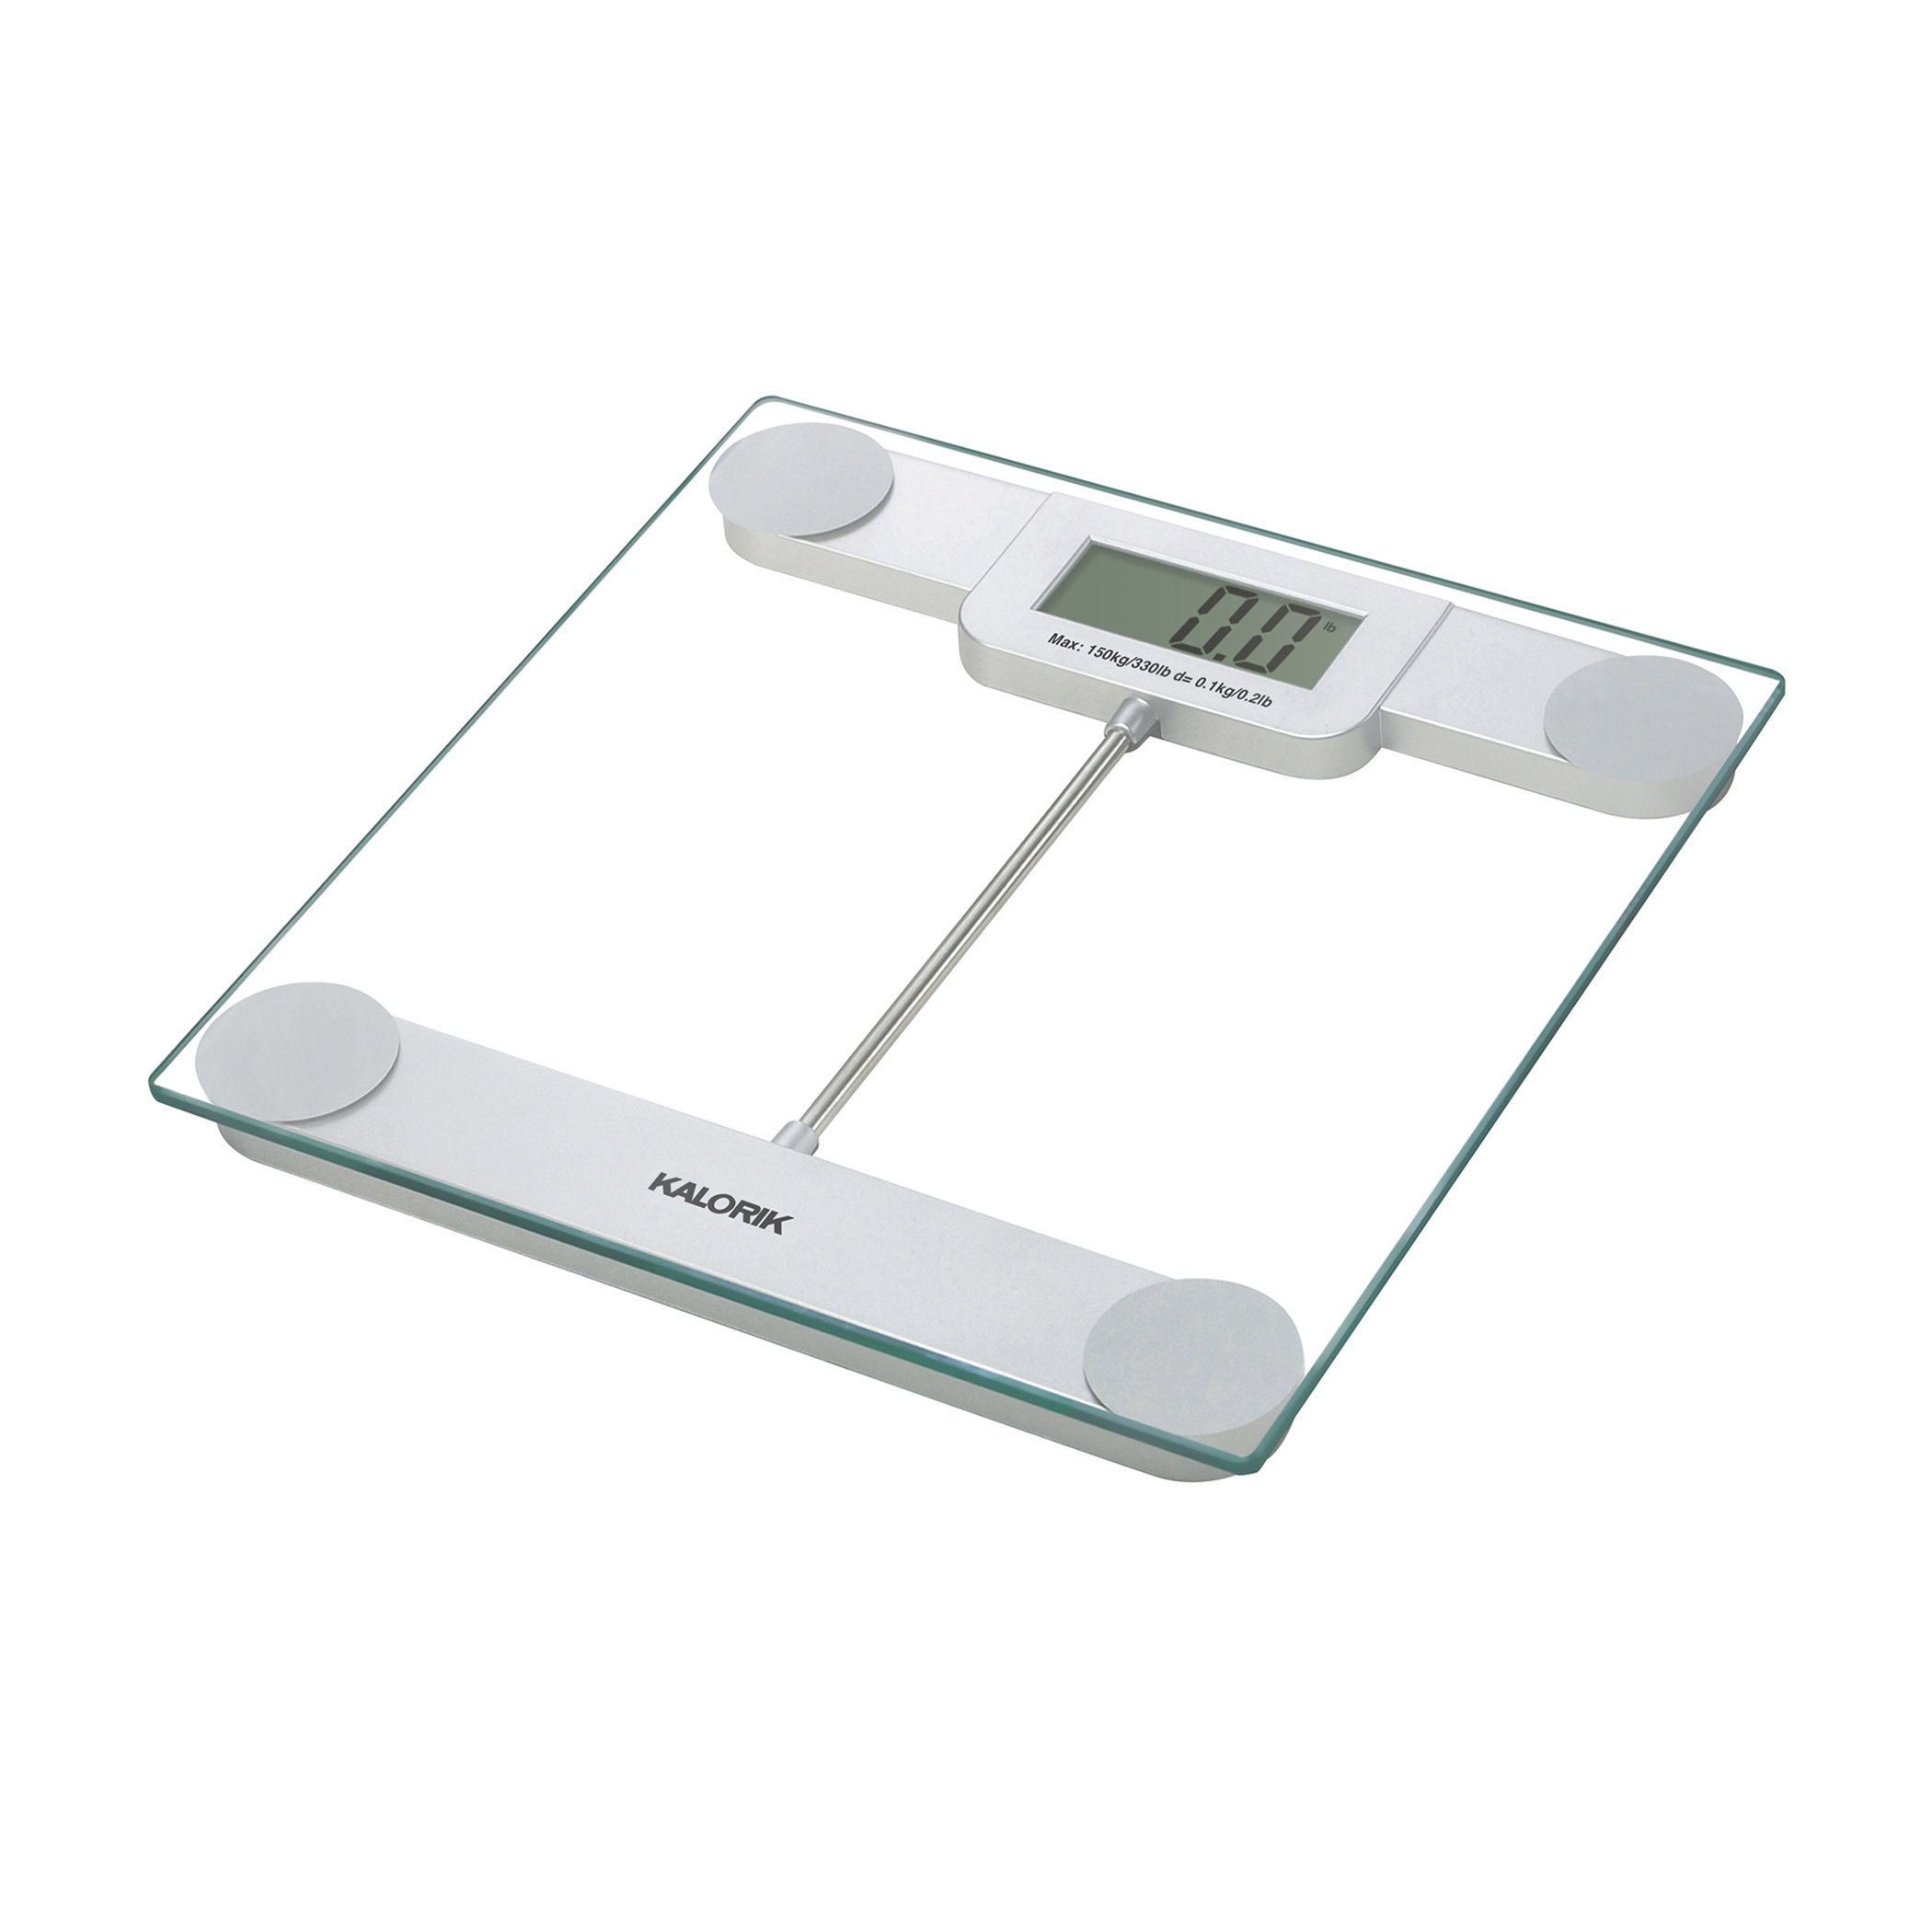 150 Kg DIGITAL ELECTRONIC LCD PERSONAL GLASS BATHROOM BODY WEIGHTING SCALE LOSE 